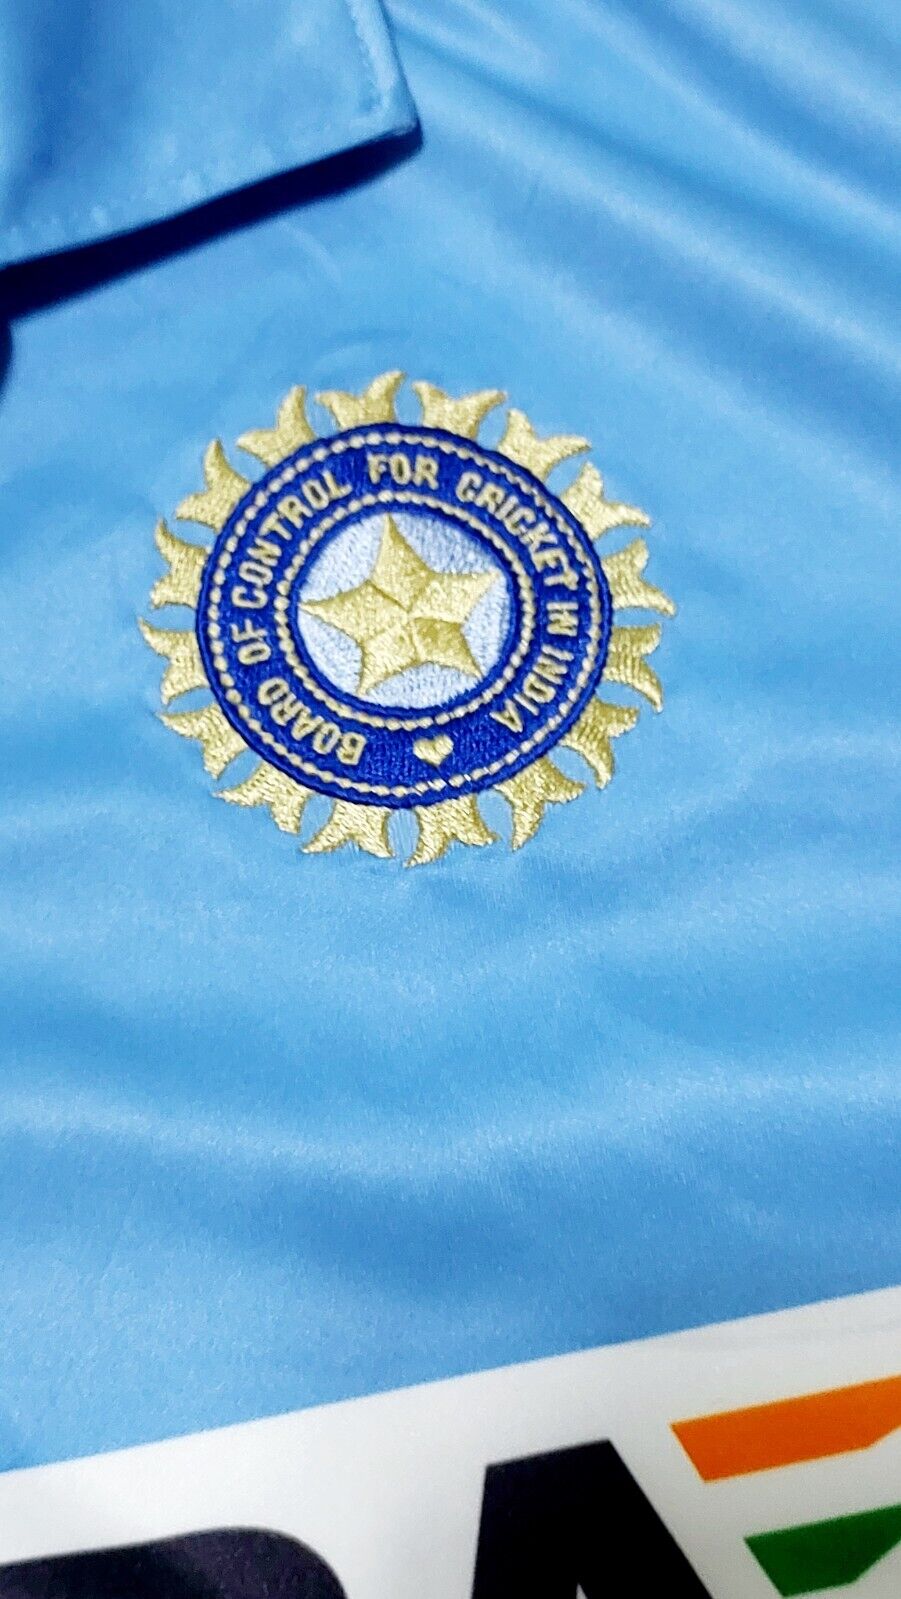 Rate logo of indian cricket team - Graphic and logo designs | Facebook